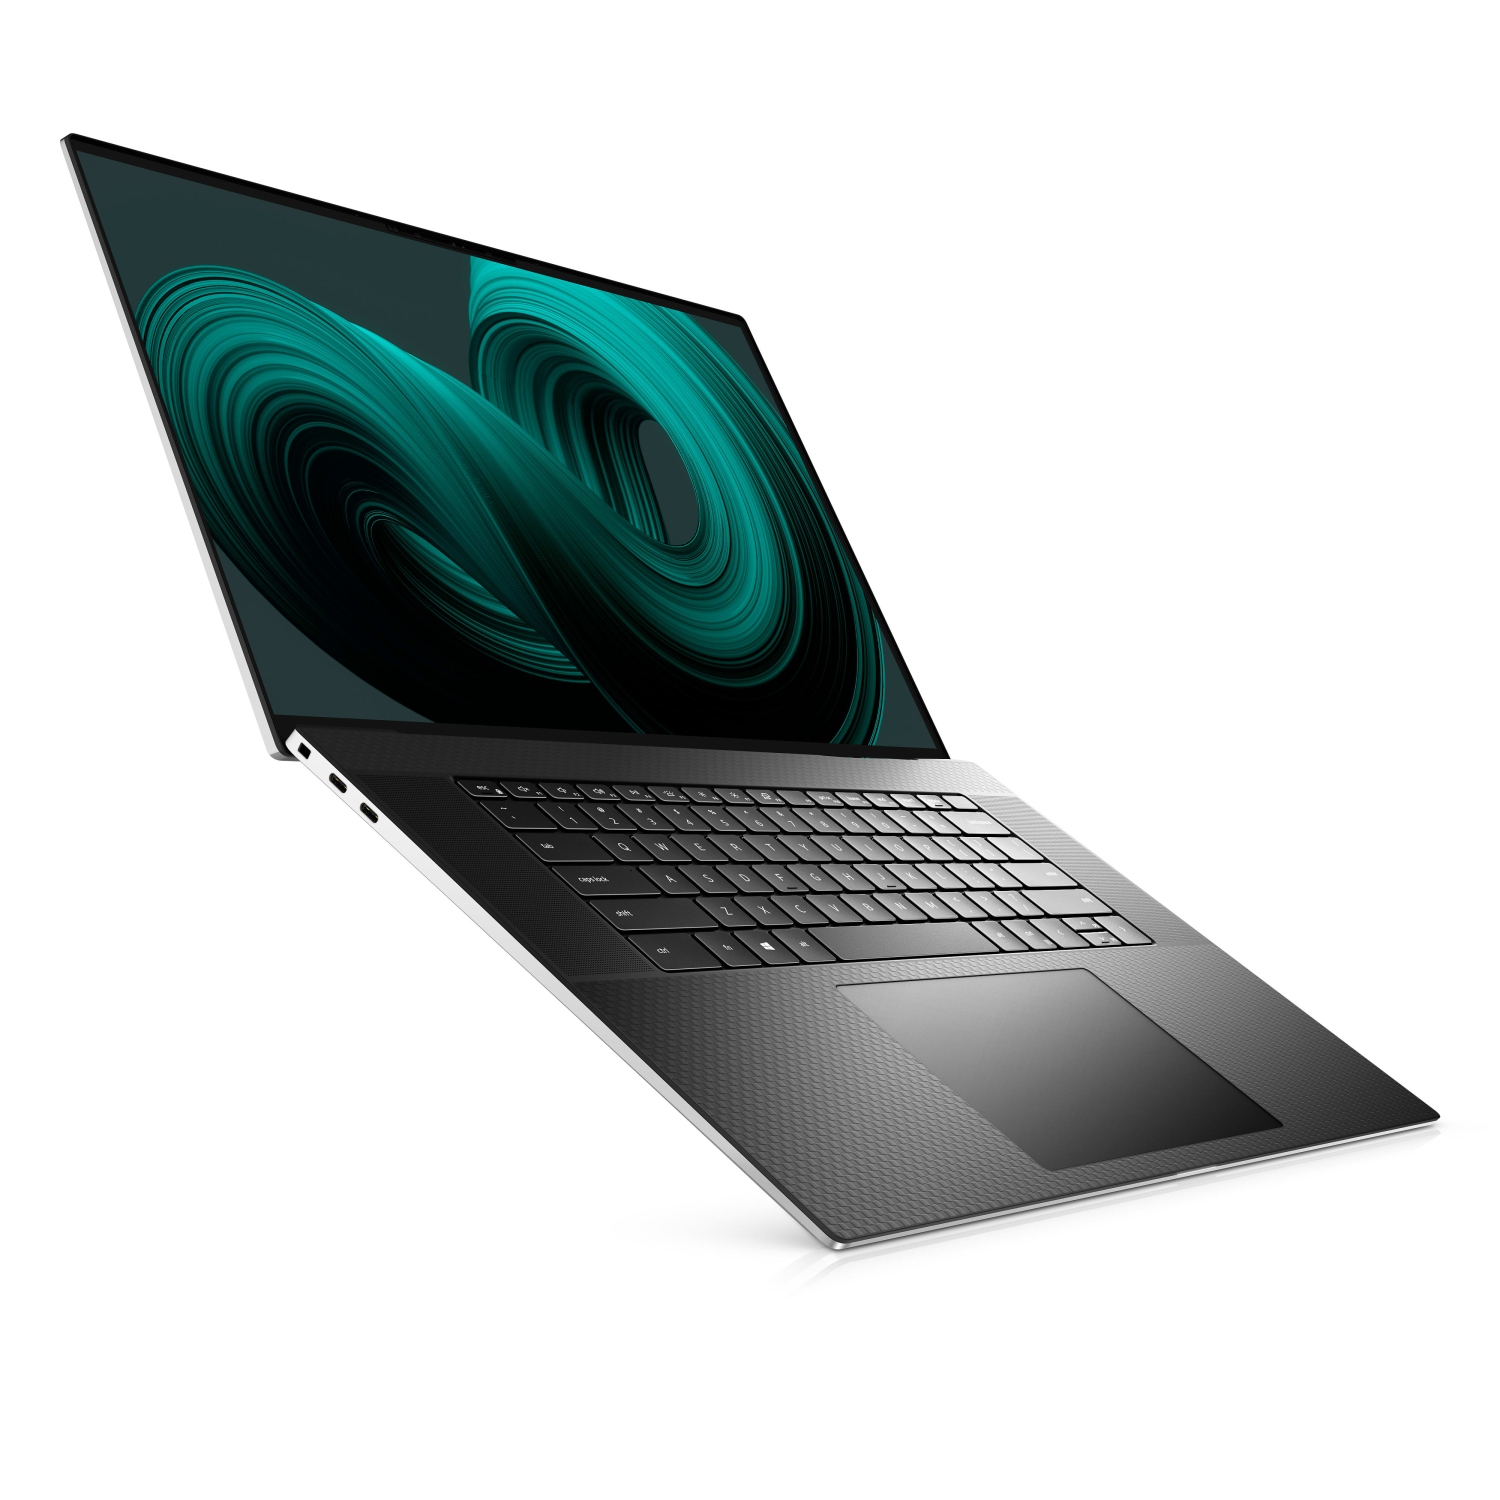 Refurbished (Excellent) - Dell XPS 17 9710 Laptop (2021) | 17" 4K Touch | Core i7 - 1TB SSD - 64GB RAM - RTX 3050 | 8 Cores @ 4.6 GHz - 11th Gen CPU Certified Refurbished